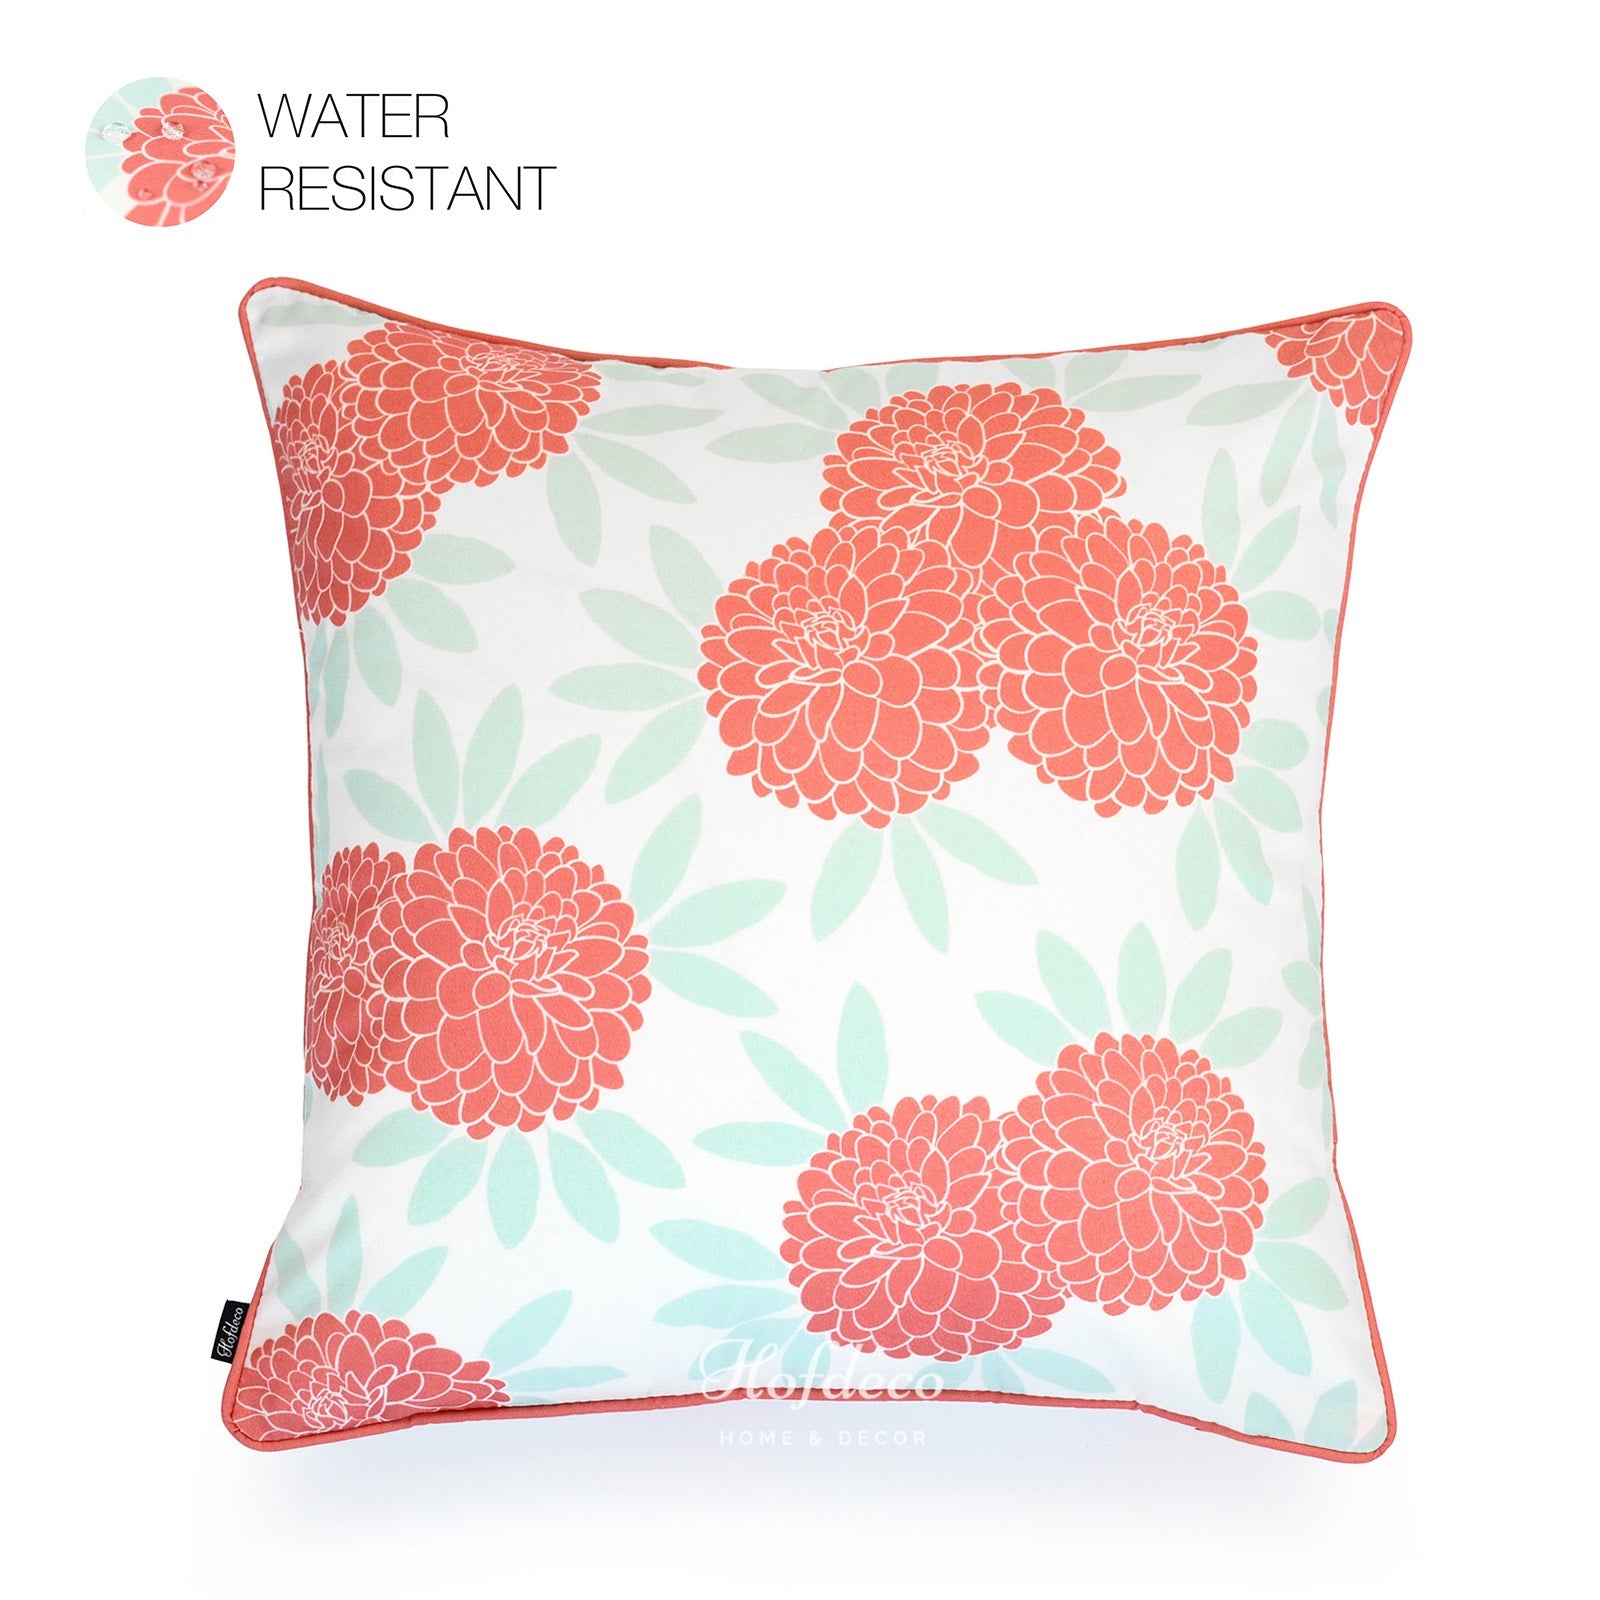 Chinoiserie Floral Outdoor Pillow Cover, Aqua Pink, 18"x18"